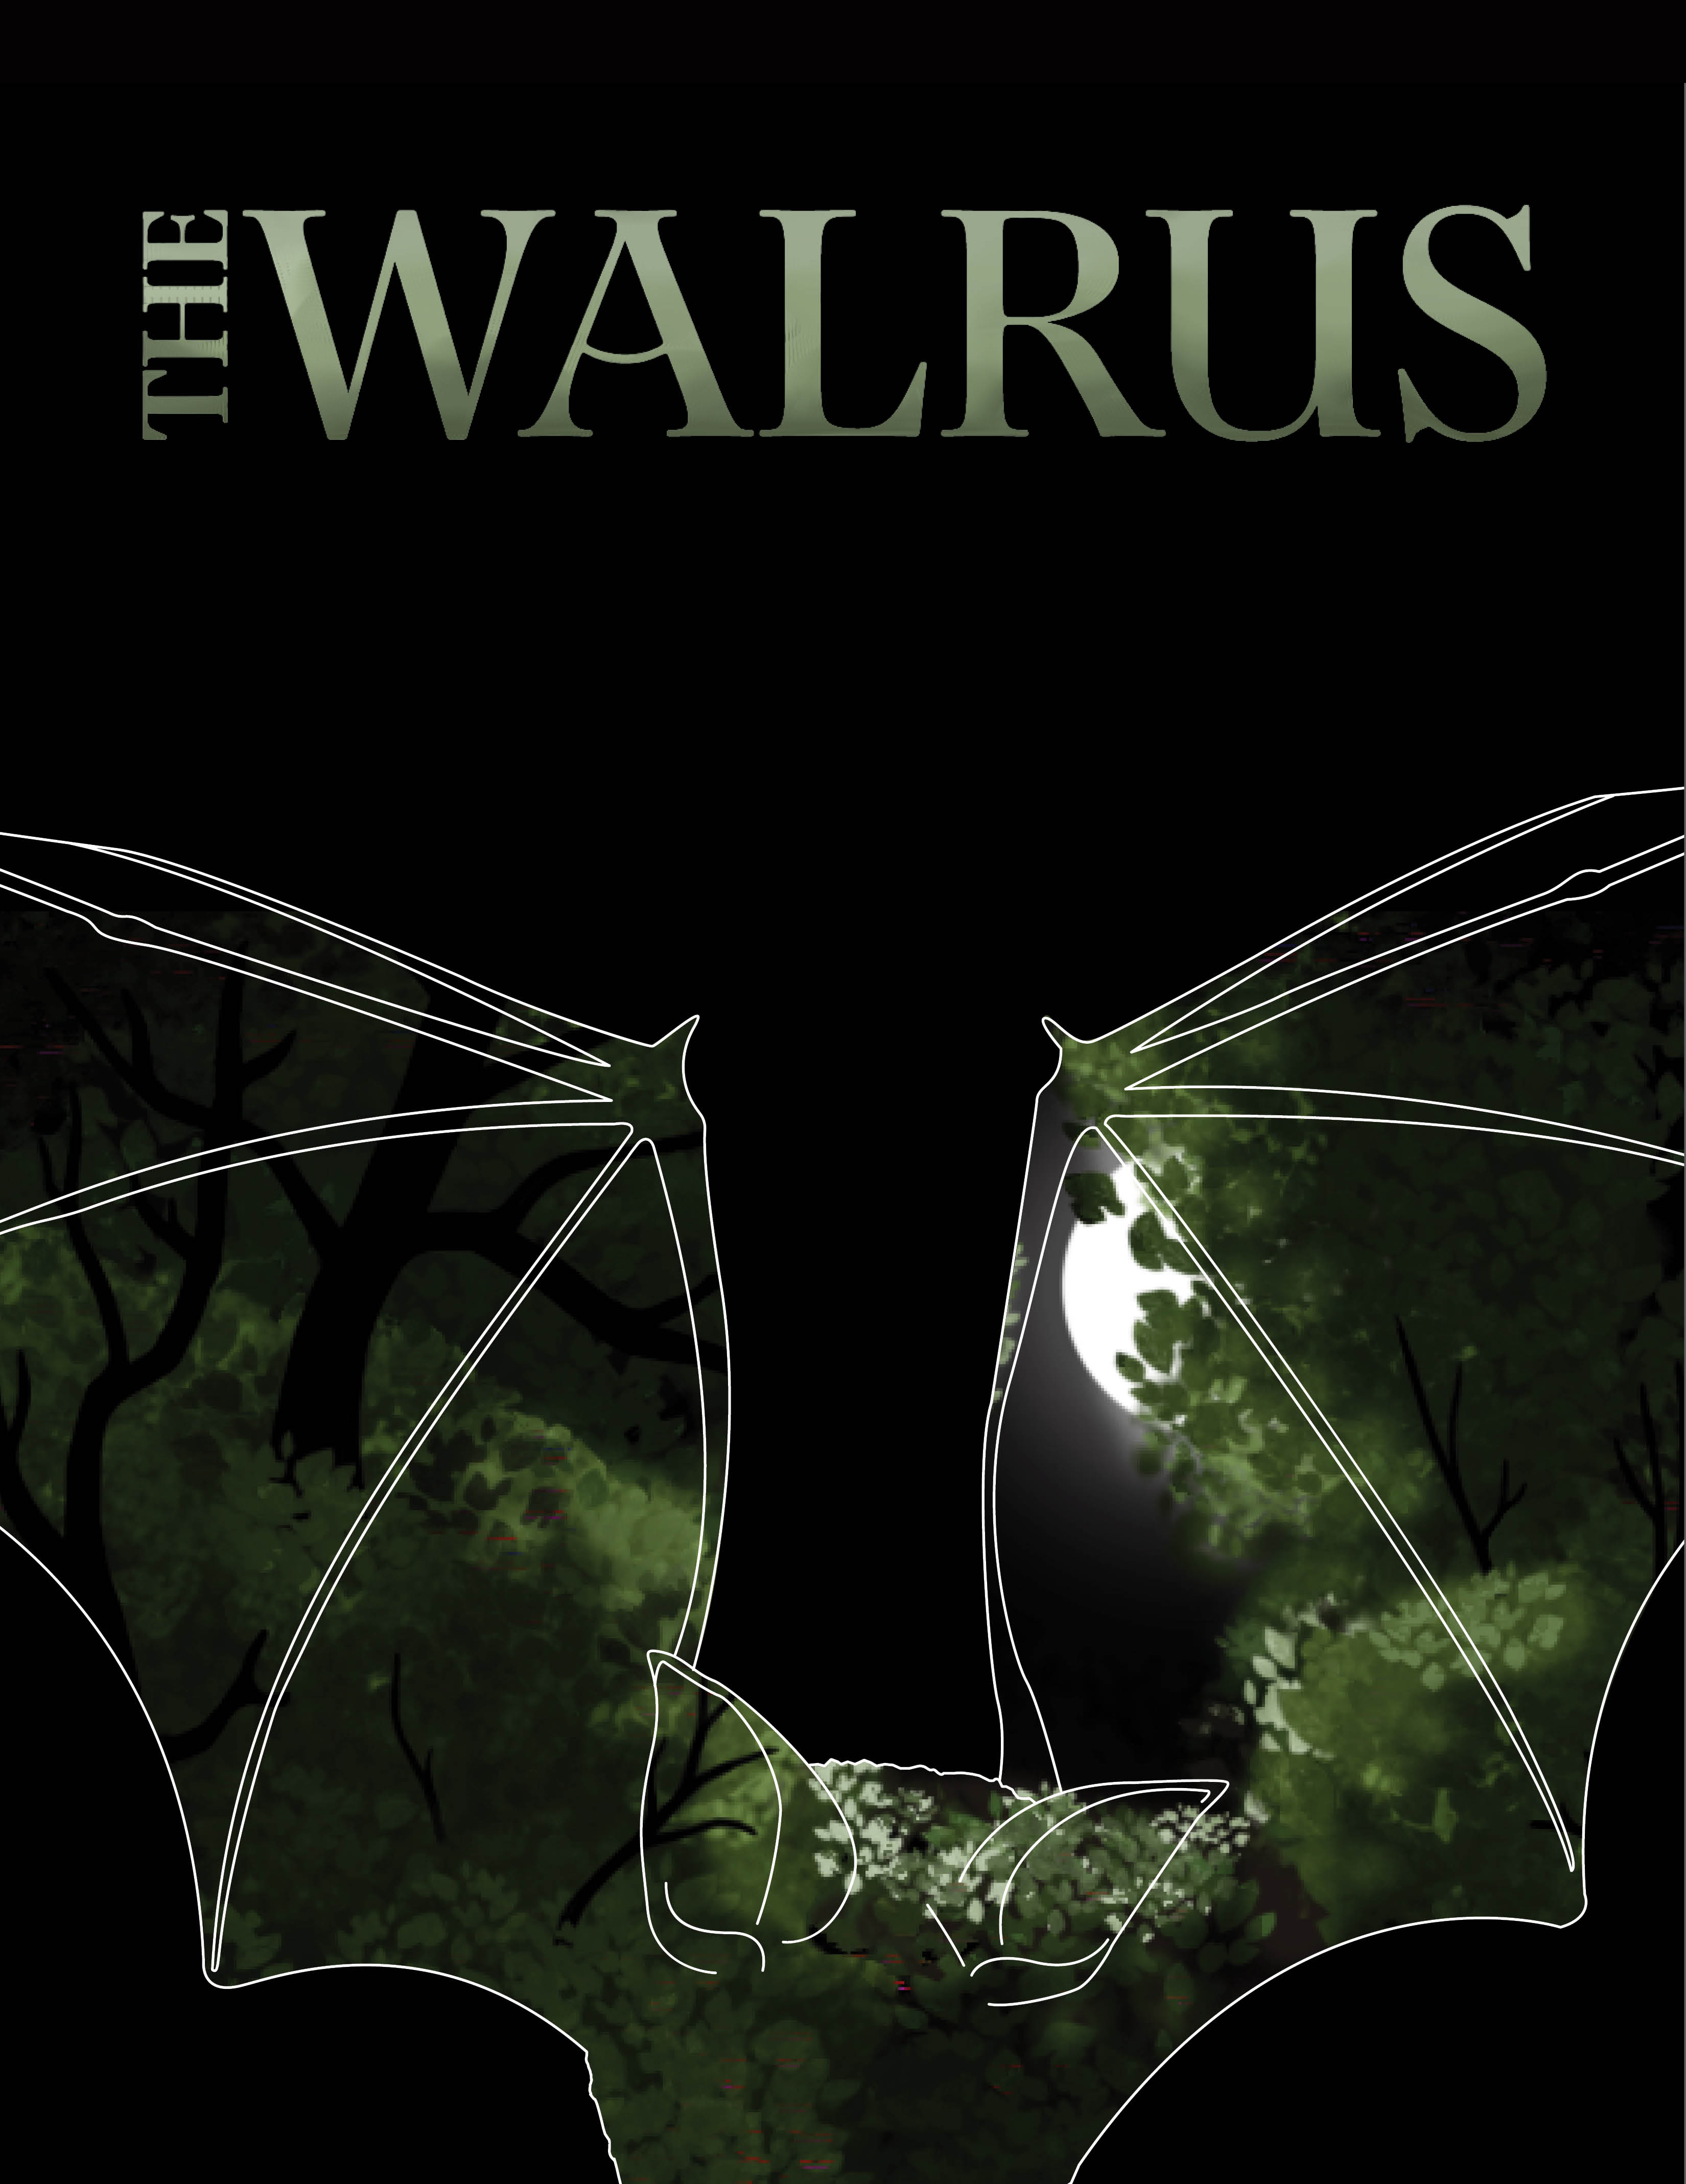 Cover for The Walrus with bat, no text